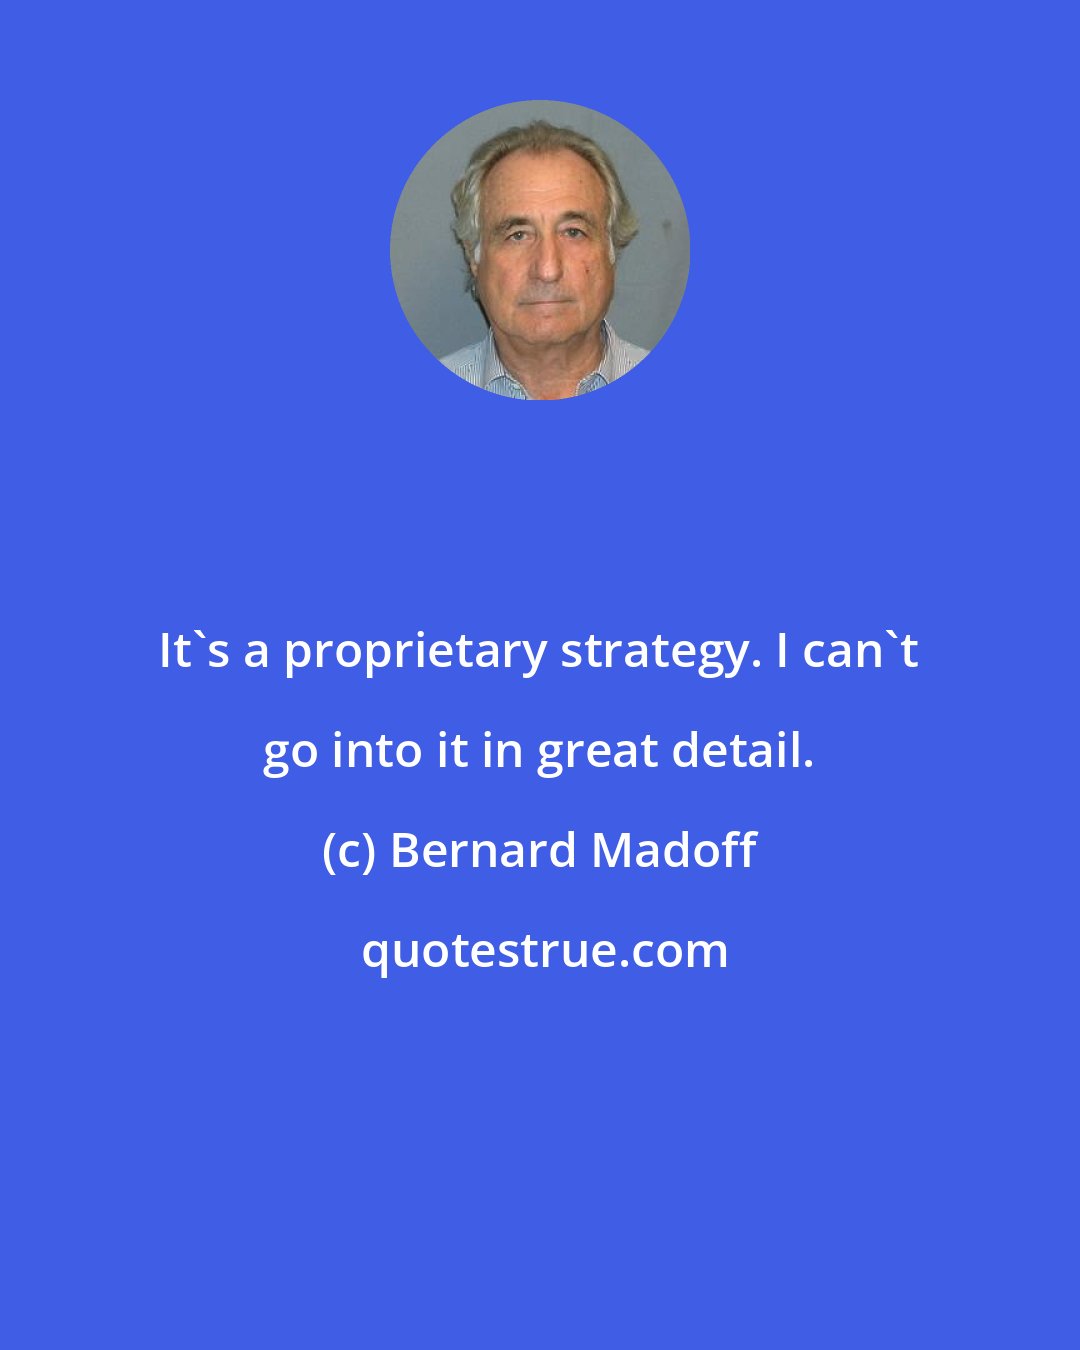 Bernard Madoff: It's a proprietary strategy. I can't go into it in great detail.